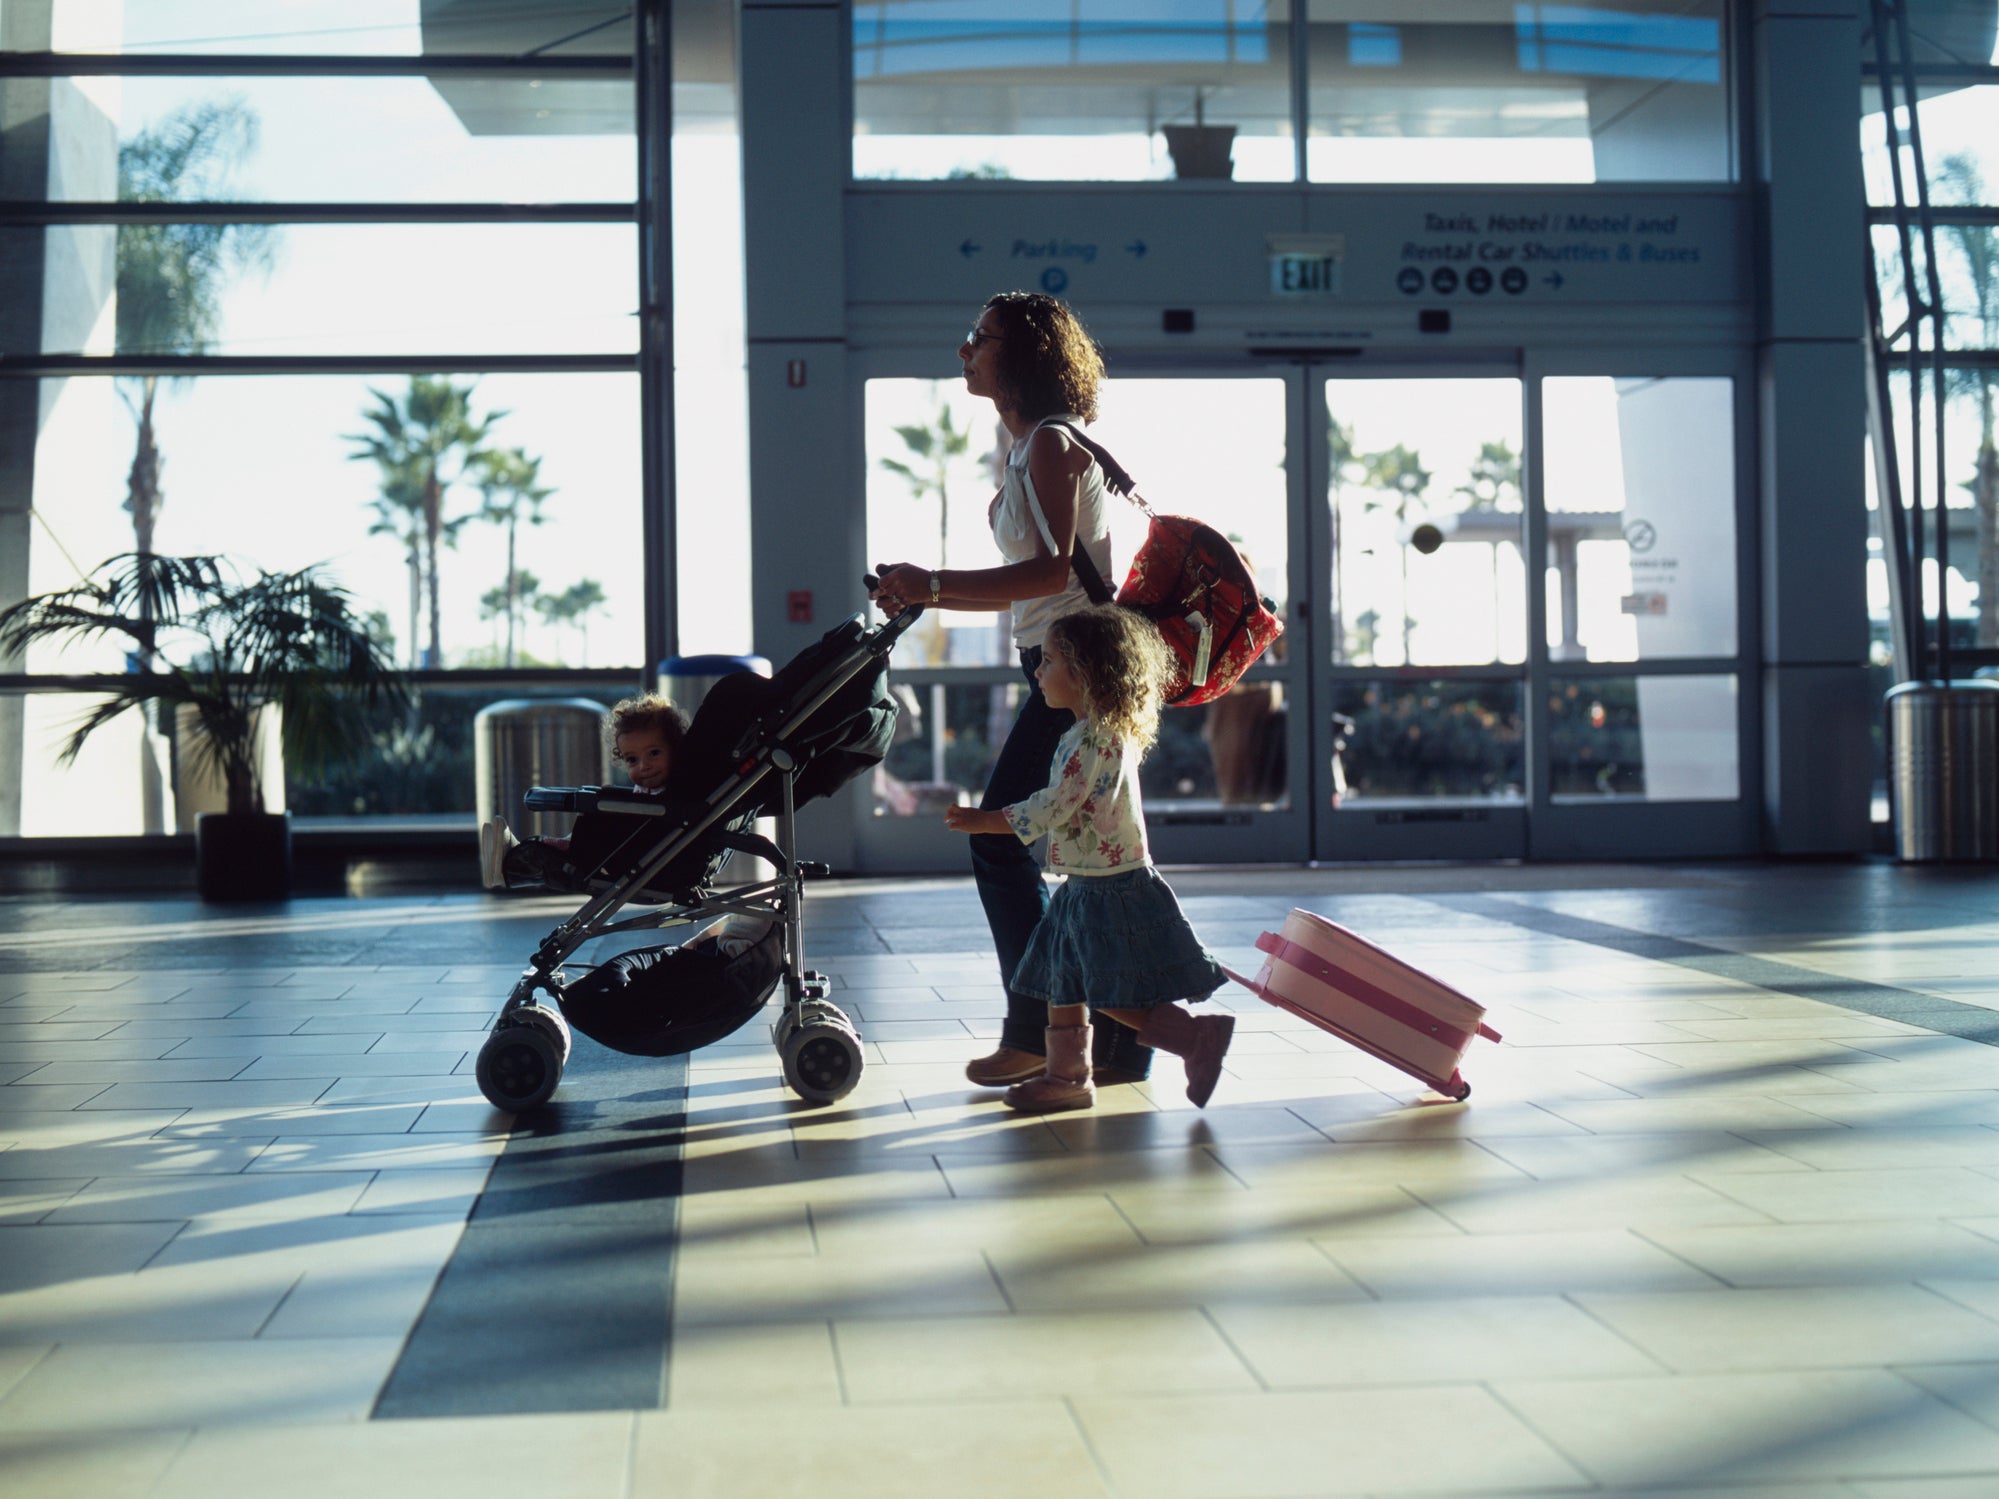 The 10 best travel strollers for your next trip - The Points Guy